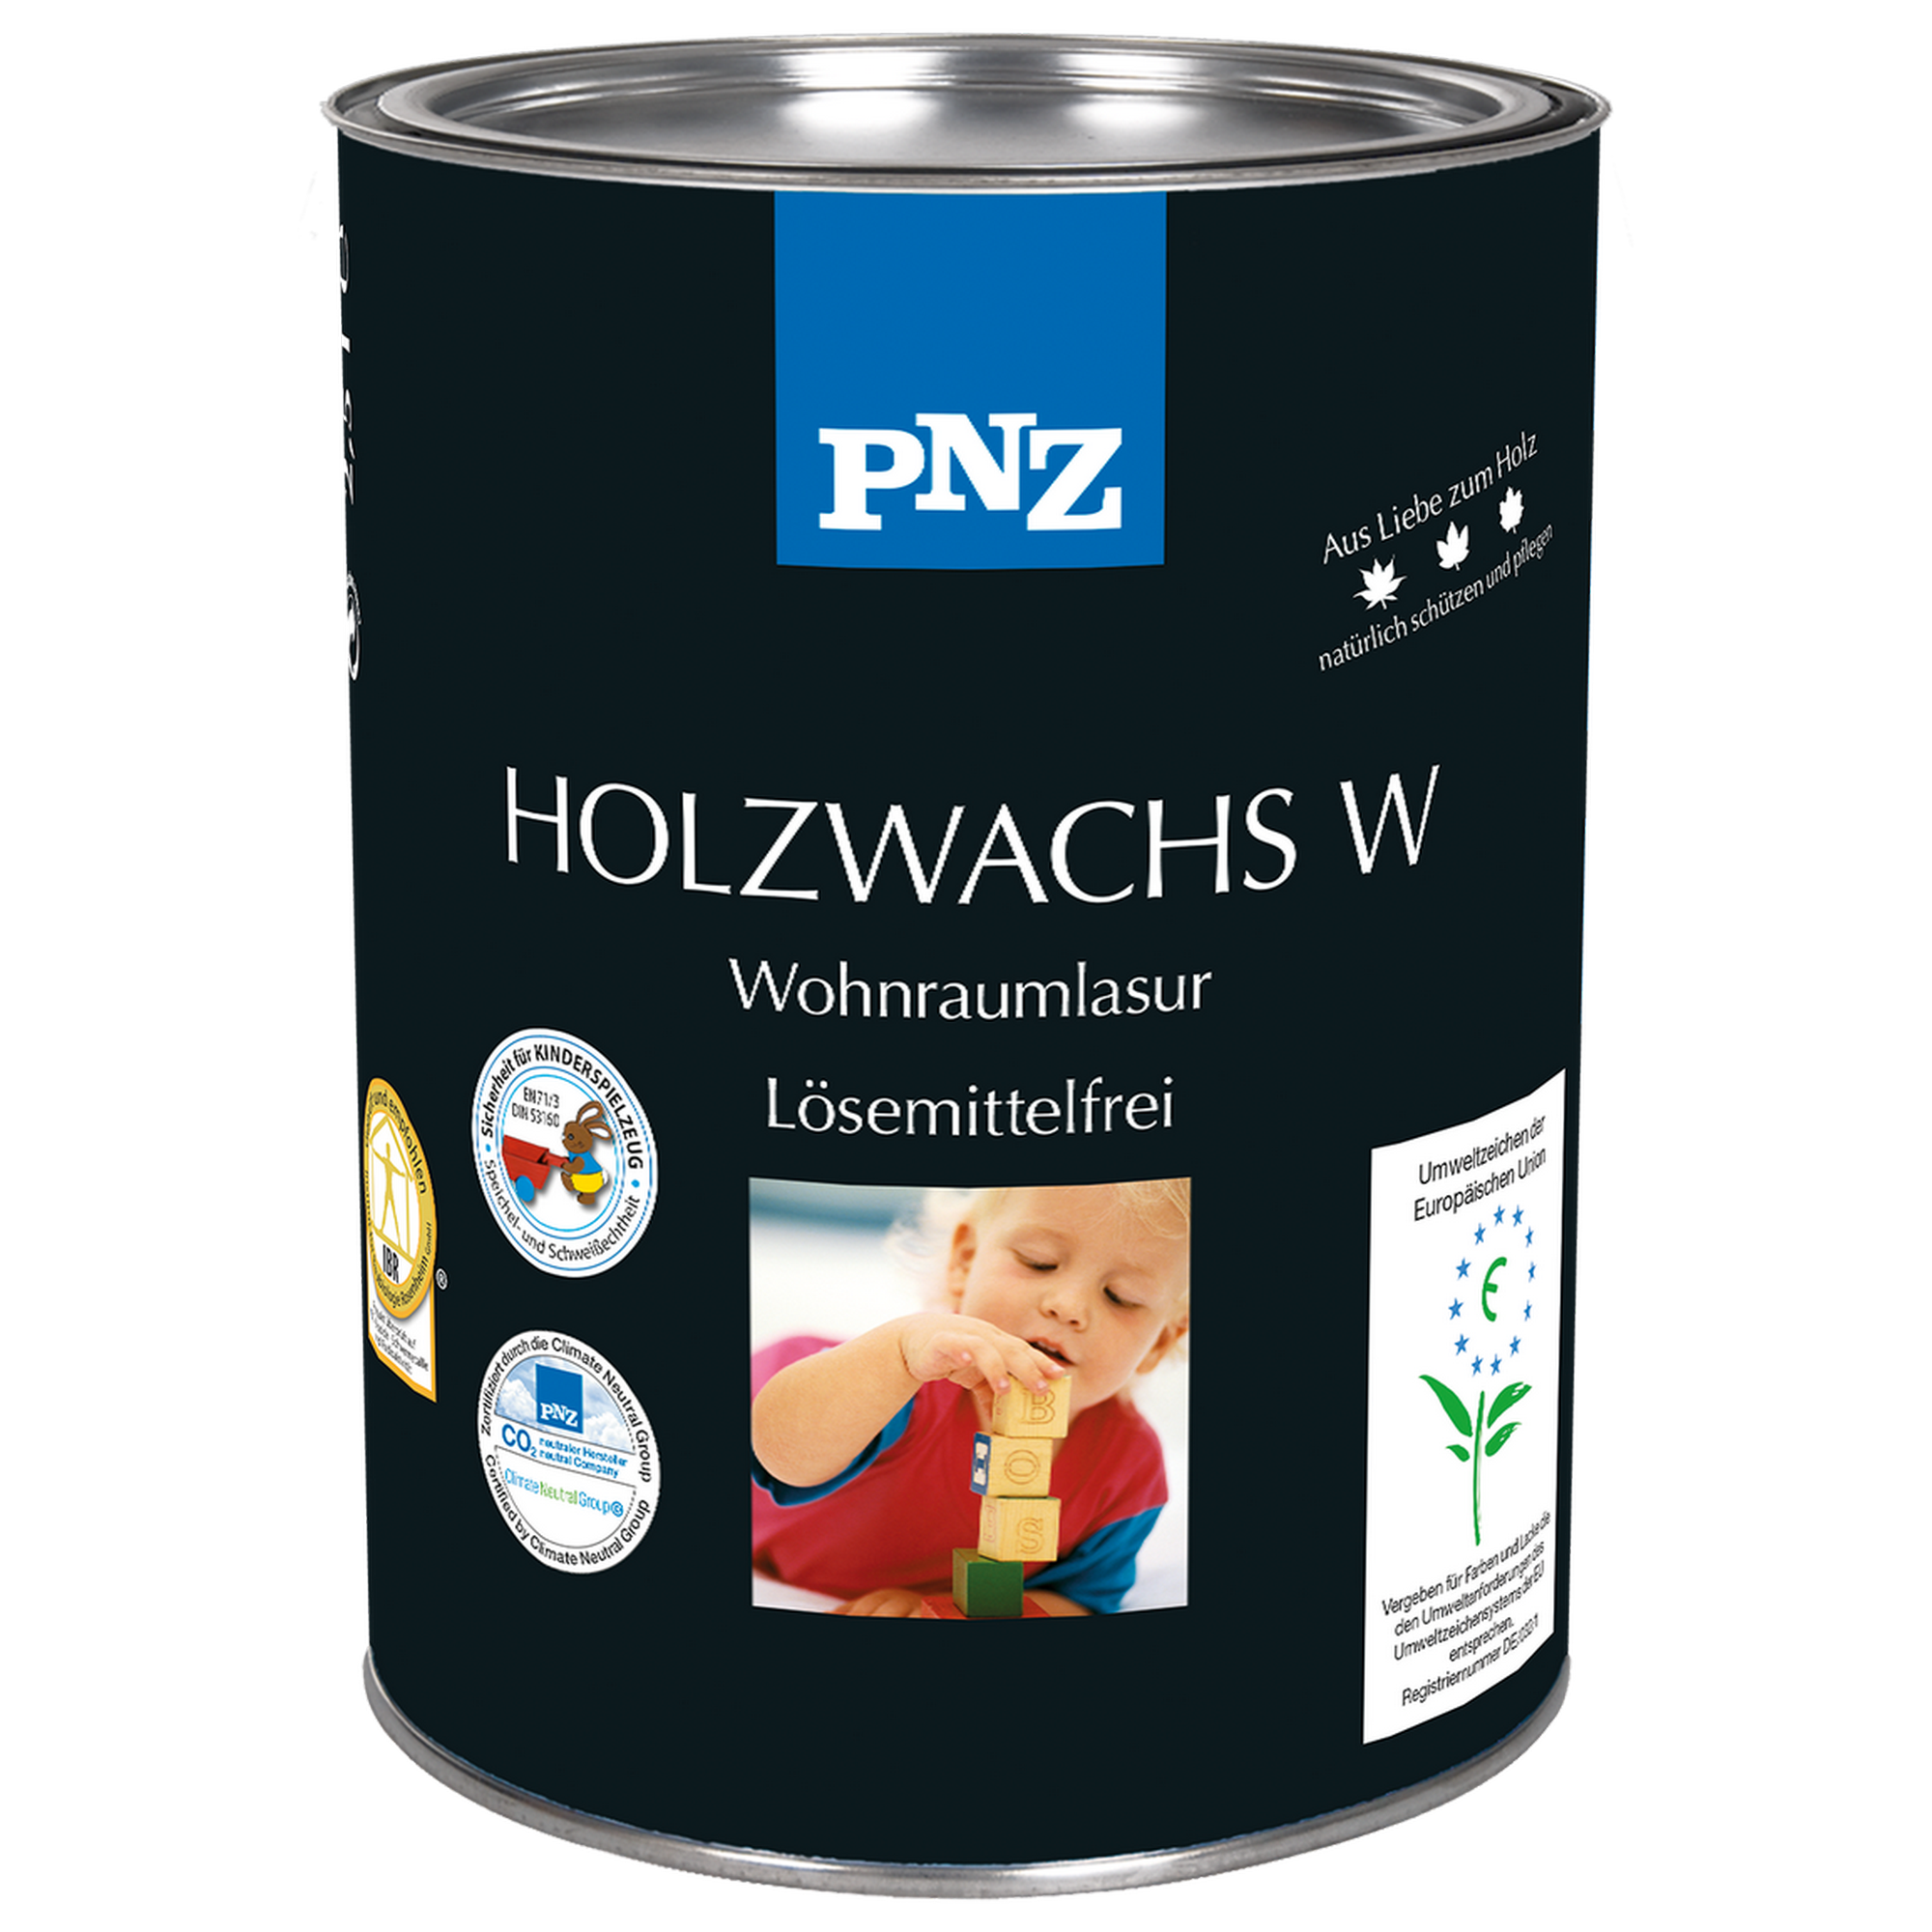 Holzwachs antikweiß 750 ml + product picture